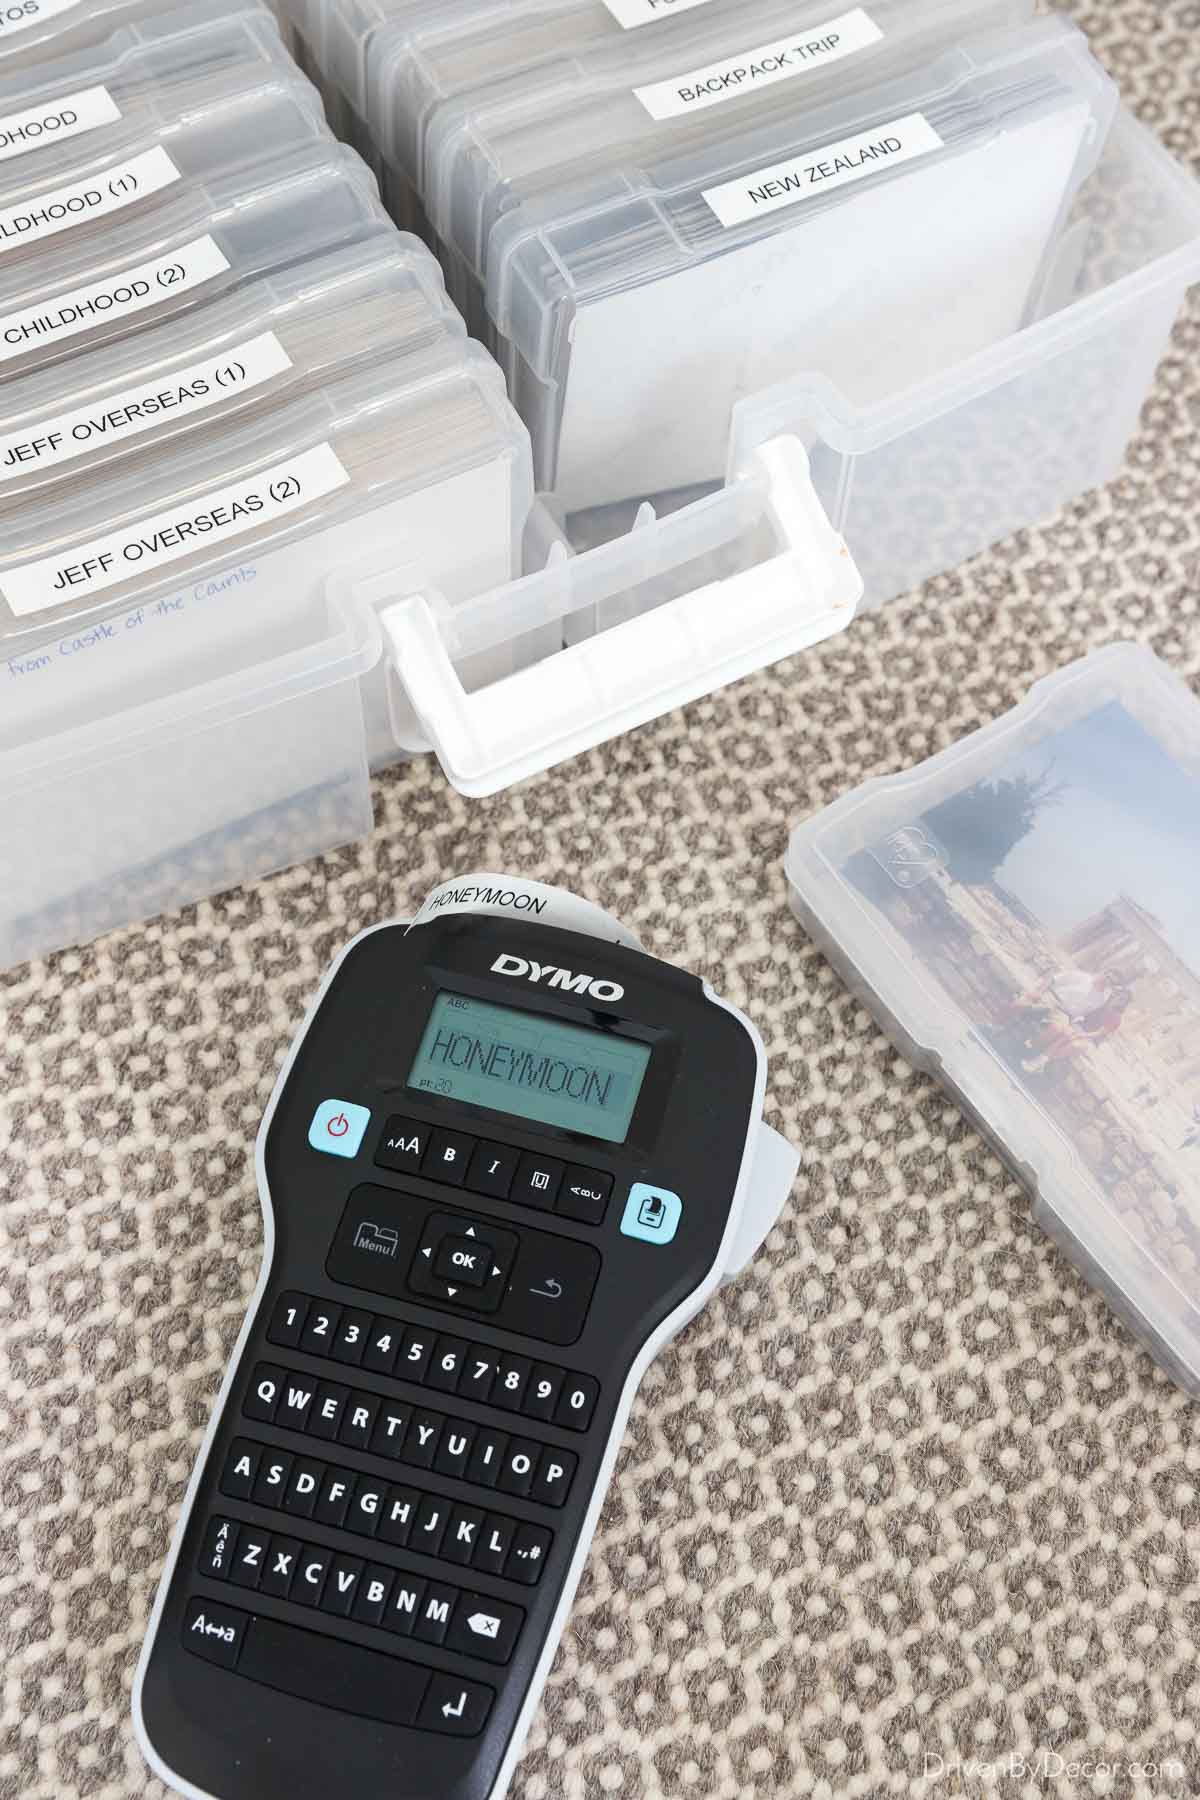 Labeler used for home organization